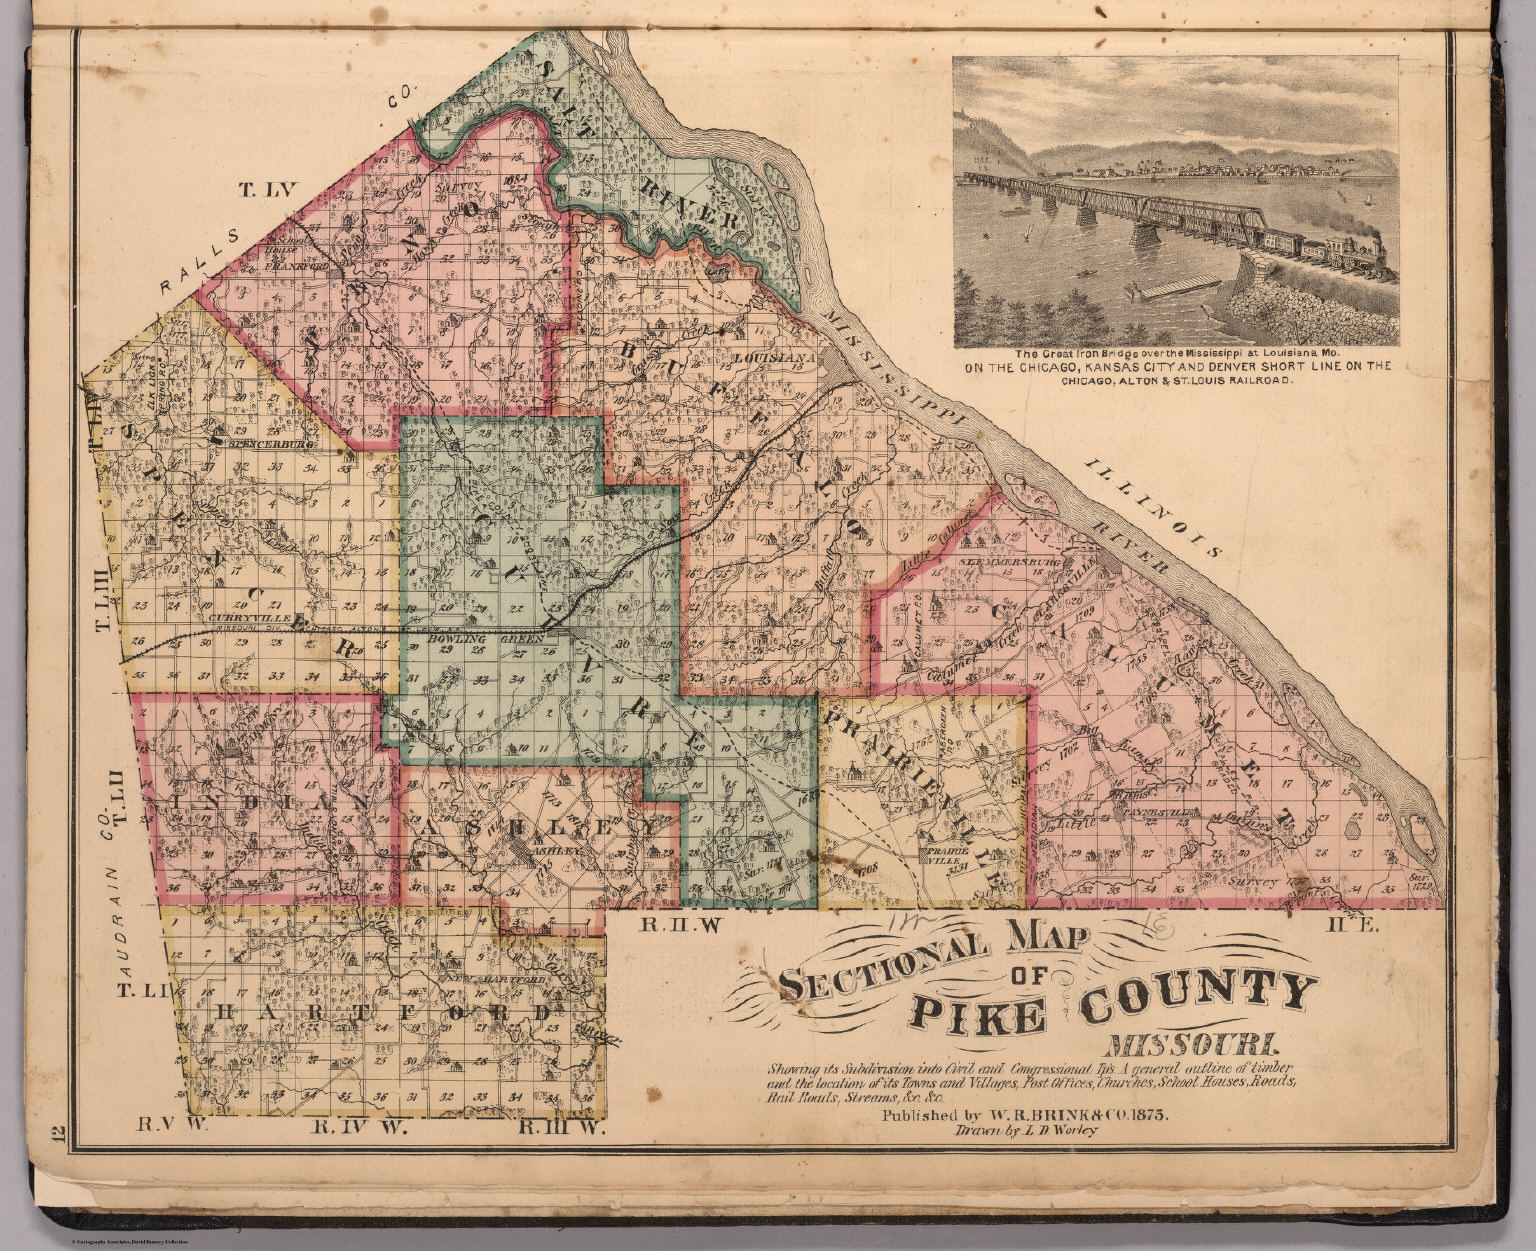 Pike County Mo Plat Map Pike County, Missouri. - David Rumsey Historical Map Collection